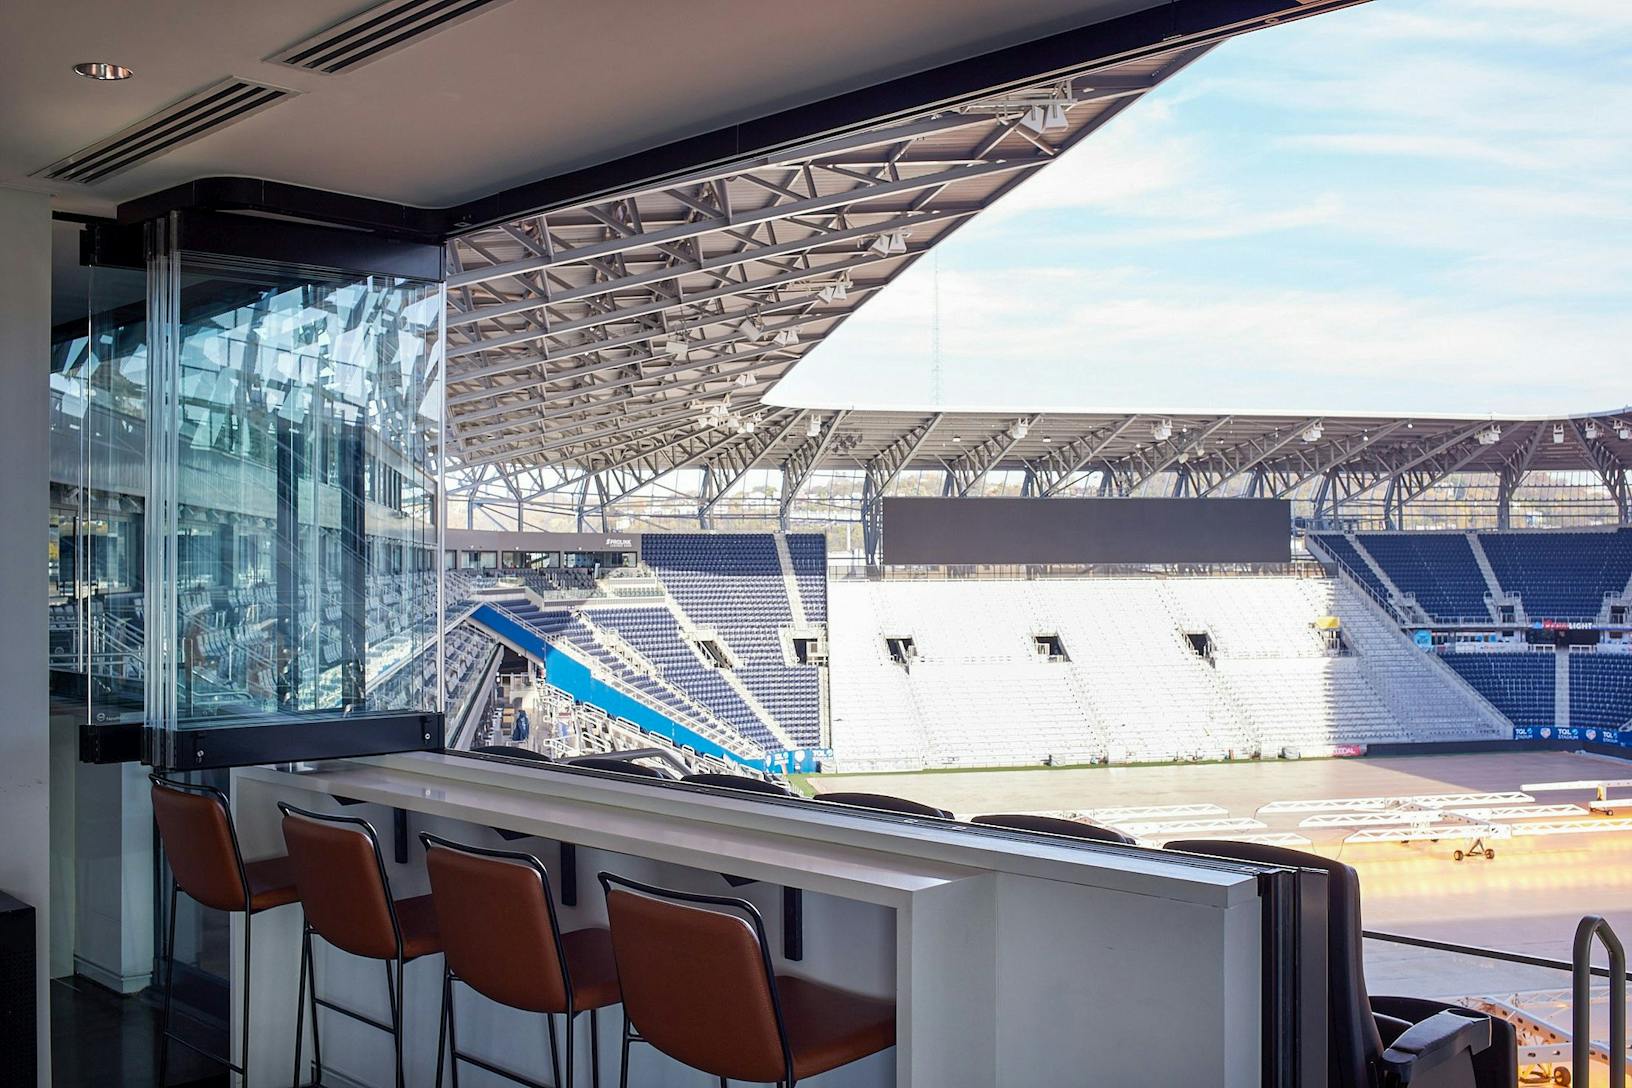 Window door combination sliding glass walls with a view of the TQL stadium